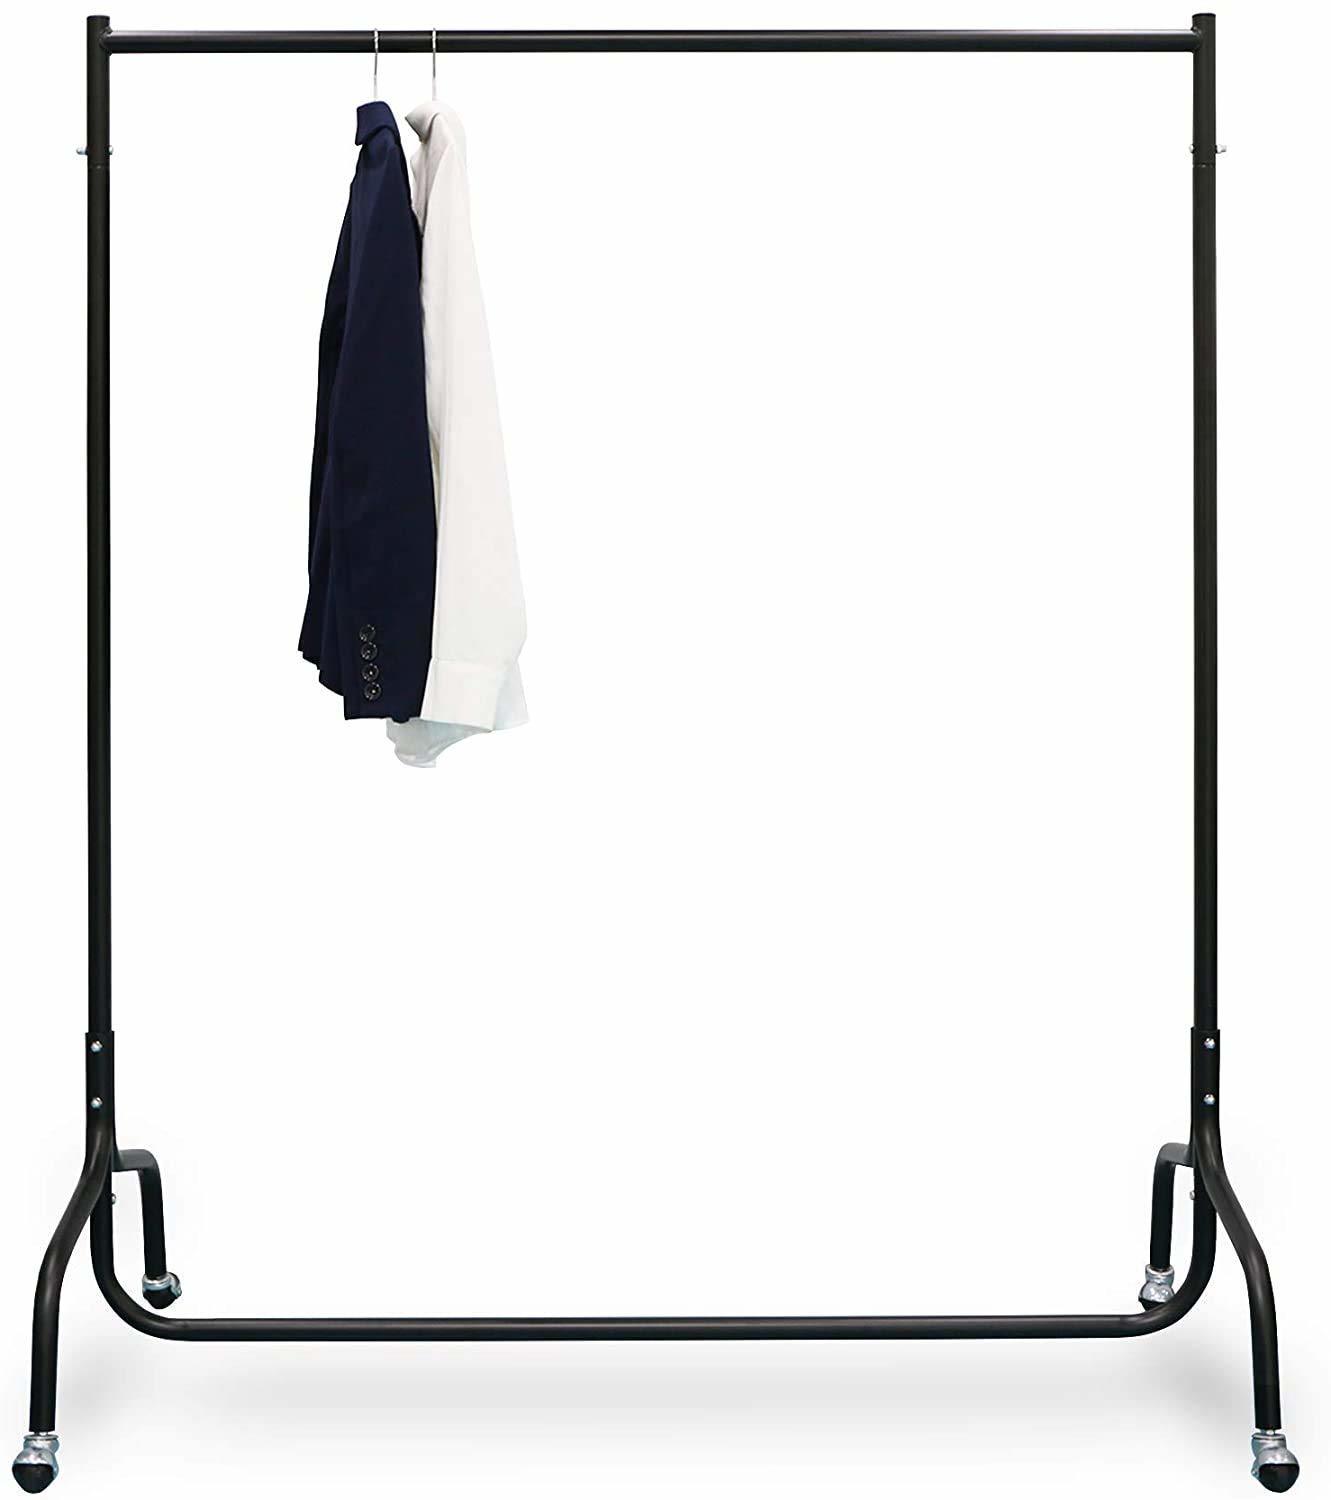 Heavy Duty Stainless Steel Clothes Rack Hanger on Wheels Rail